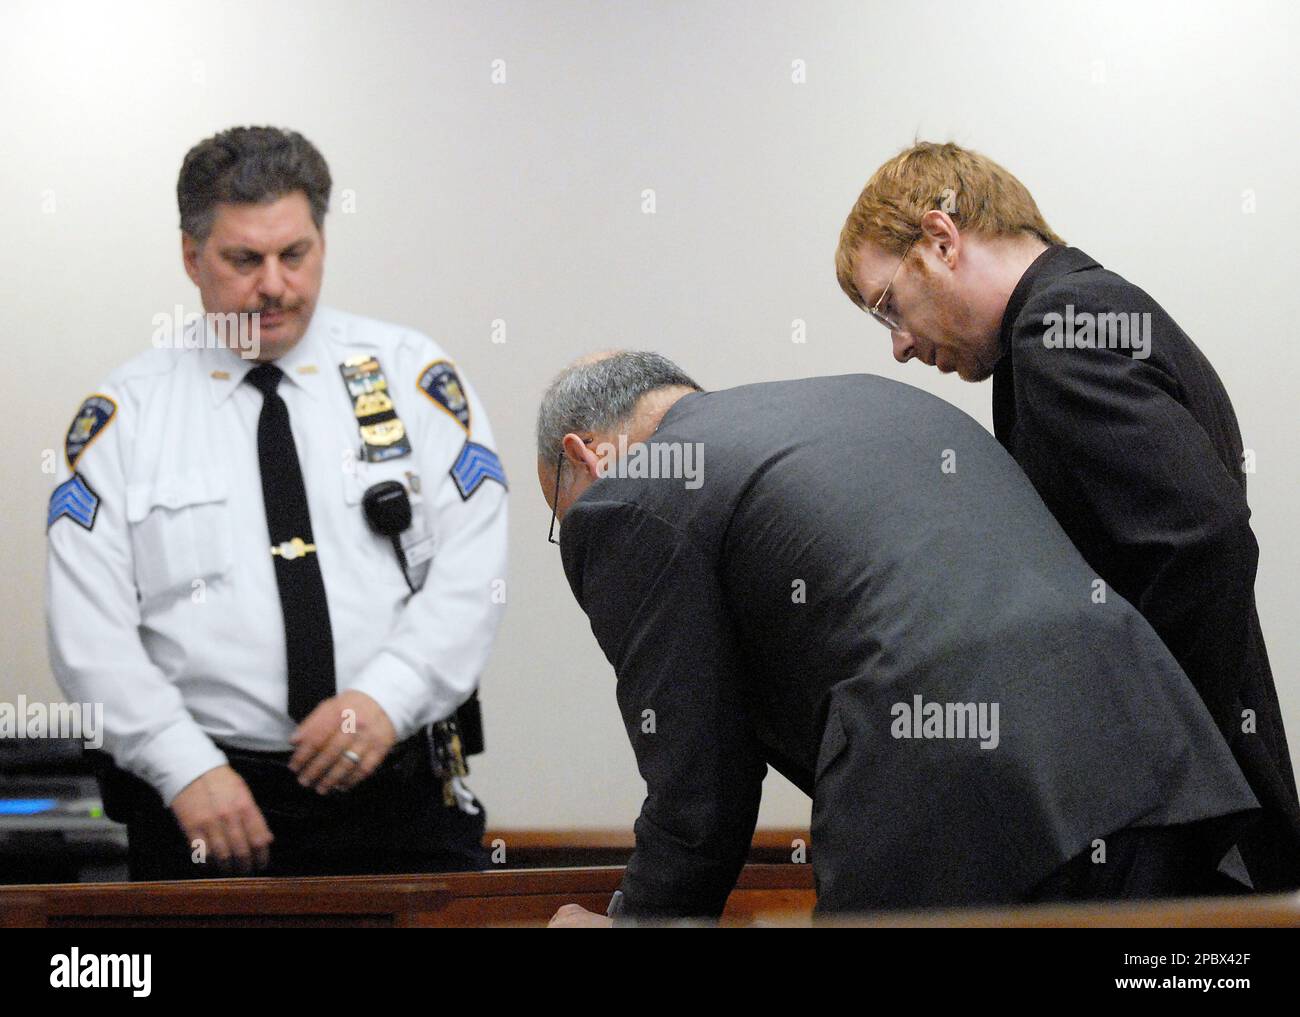 Former Phish singer Trey Anastasio , right, signs papers with his lawyer Steve Coffey, center, during Anastasio's appearance in Washington County court in Fort Edward, N.Y, Tuesday afternoon, Feb. 27, 2007, Arrested on drug charges during a Dec. 15 traffic stop, former Phish singer Trey Anastasio pleaded not guilty Tuesday and was released on bail. (AP Photo/The Post Star, Erin Reid Coker) Stock Photo